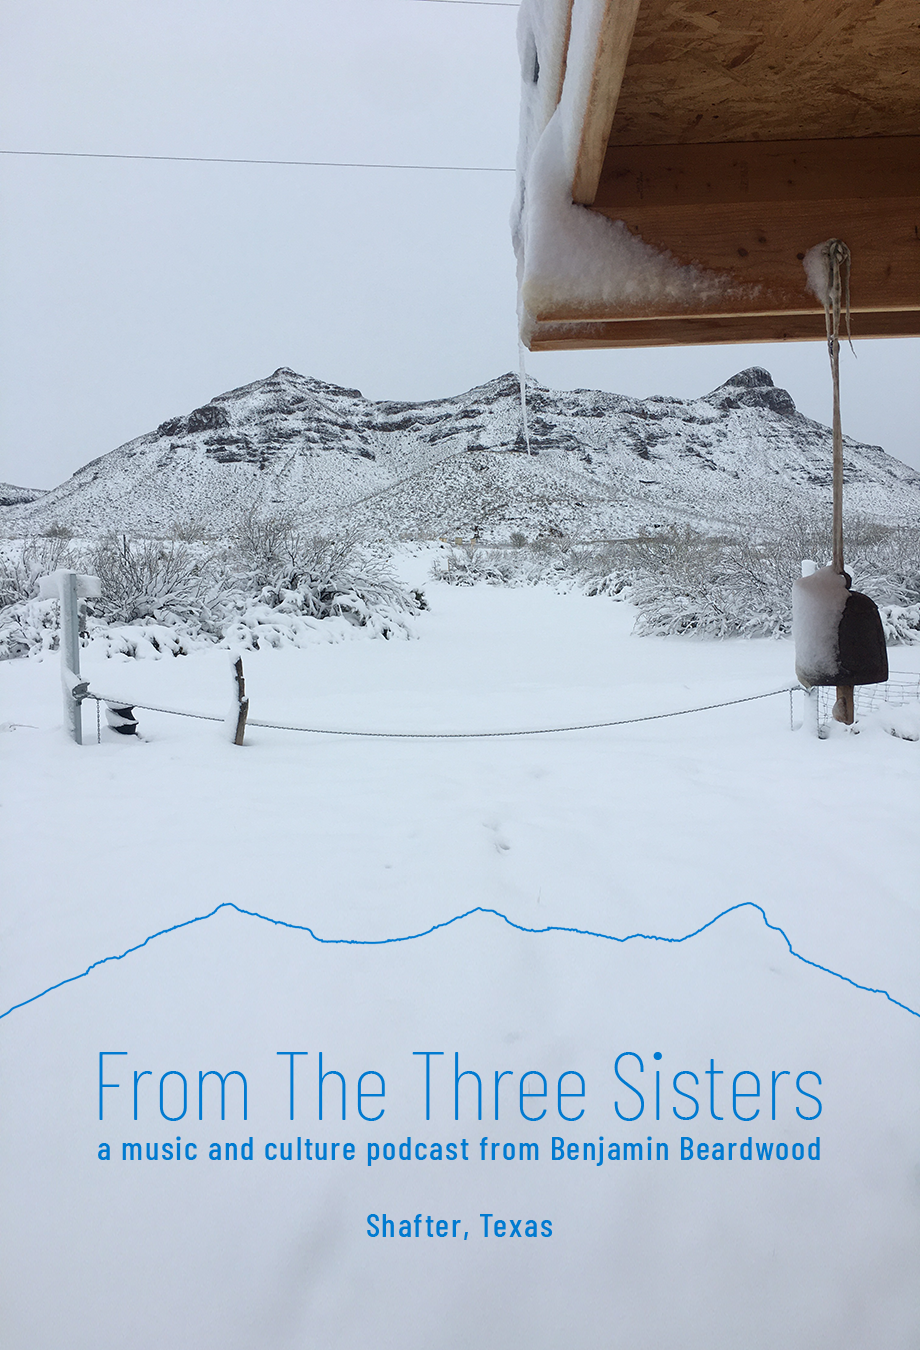 The Three Sisters in winter from Benjamin's nest